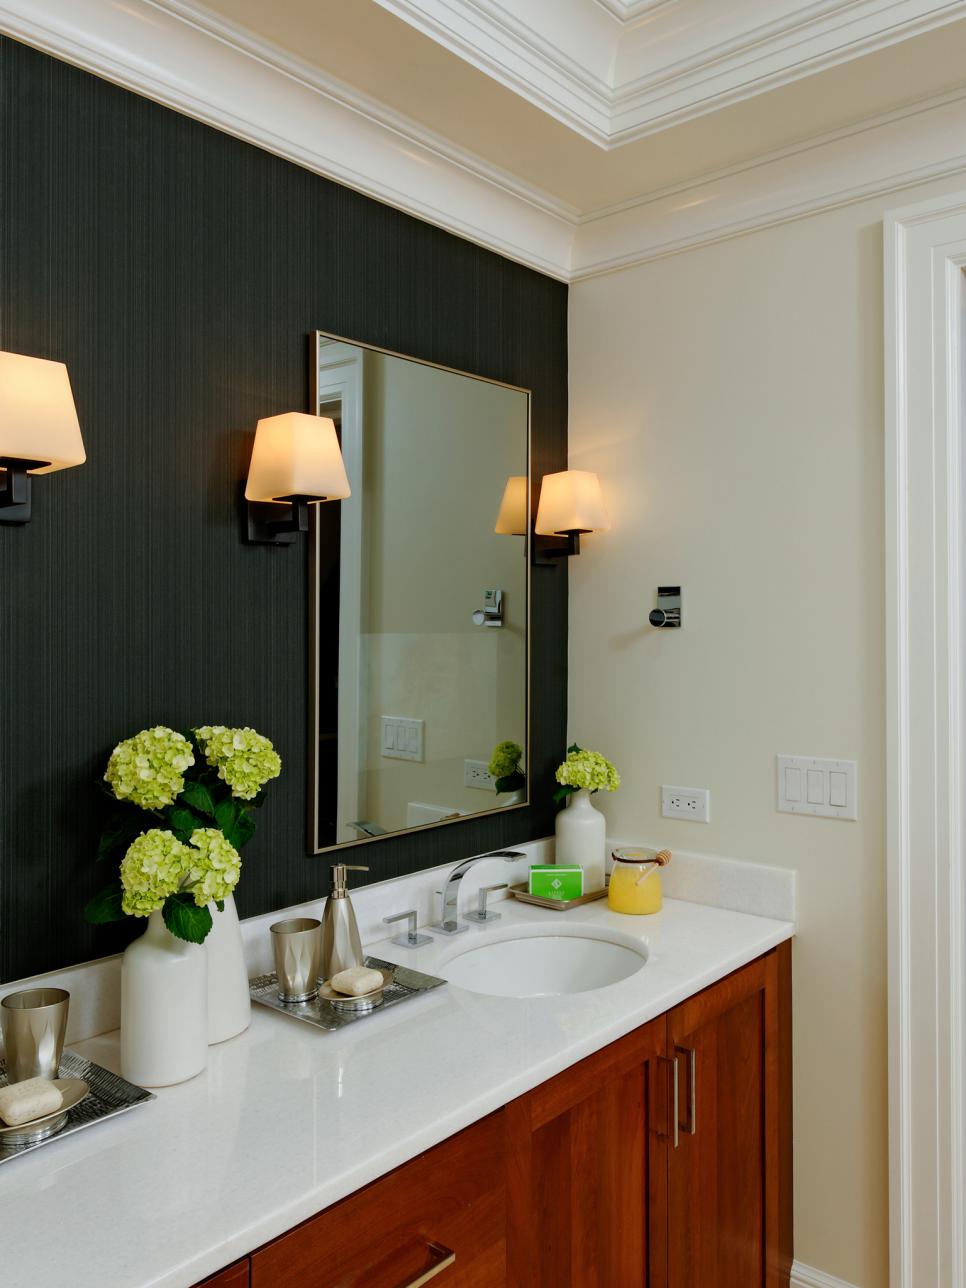 Bathroom With Black Wallpaper Focal Wall, Wood Vanity and Sconces